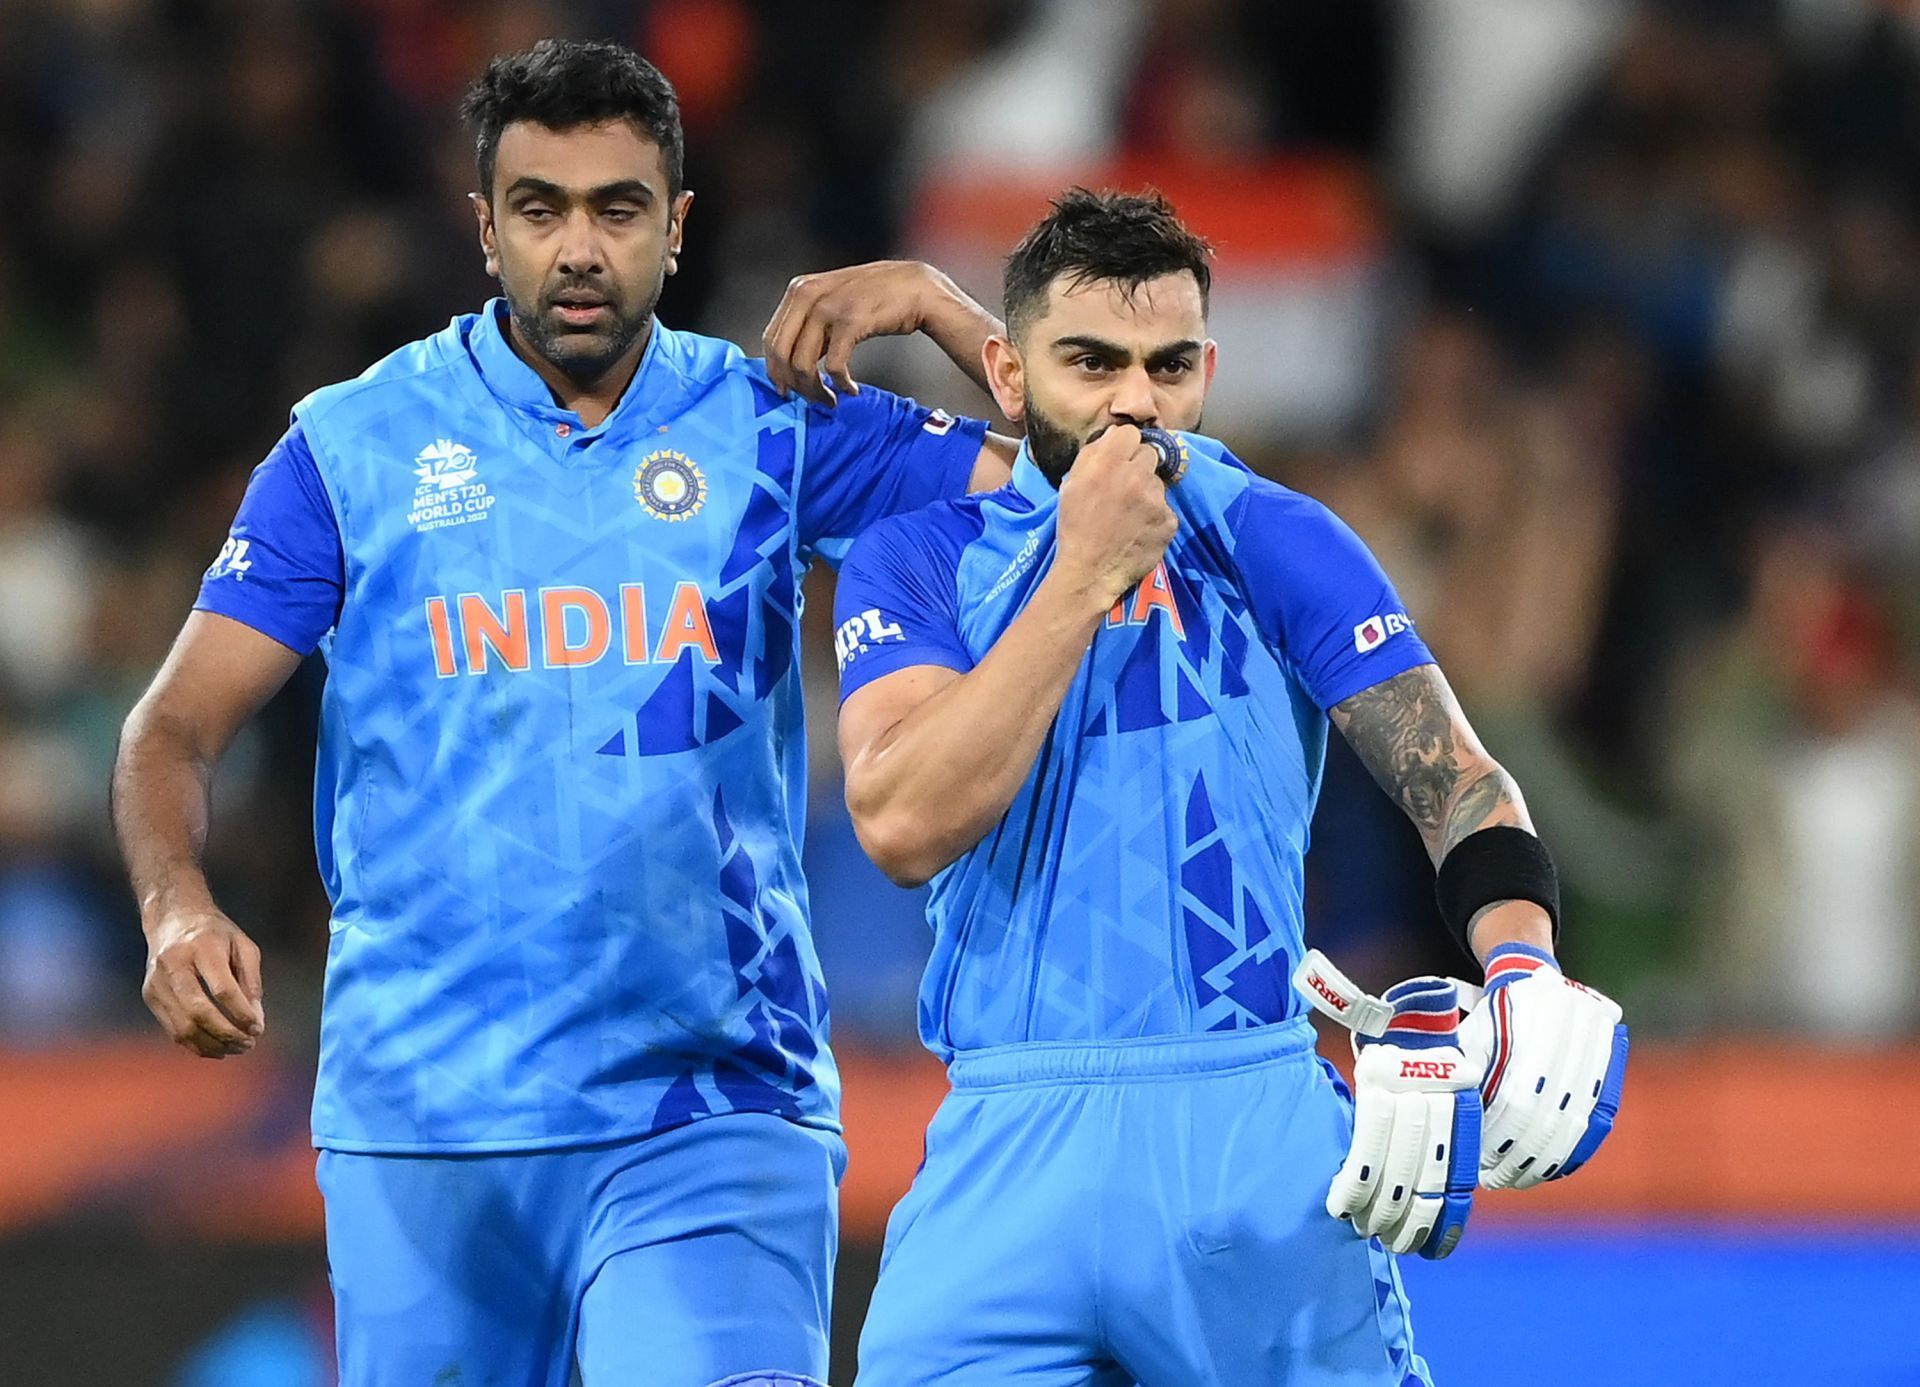 Virat Kohli (right) celebrates India&rsquo;s win over Pakistan in the T20 World Cup at the Melbourne Cricket Ground (MCG). Pic: Getty Images